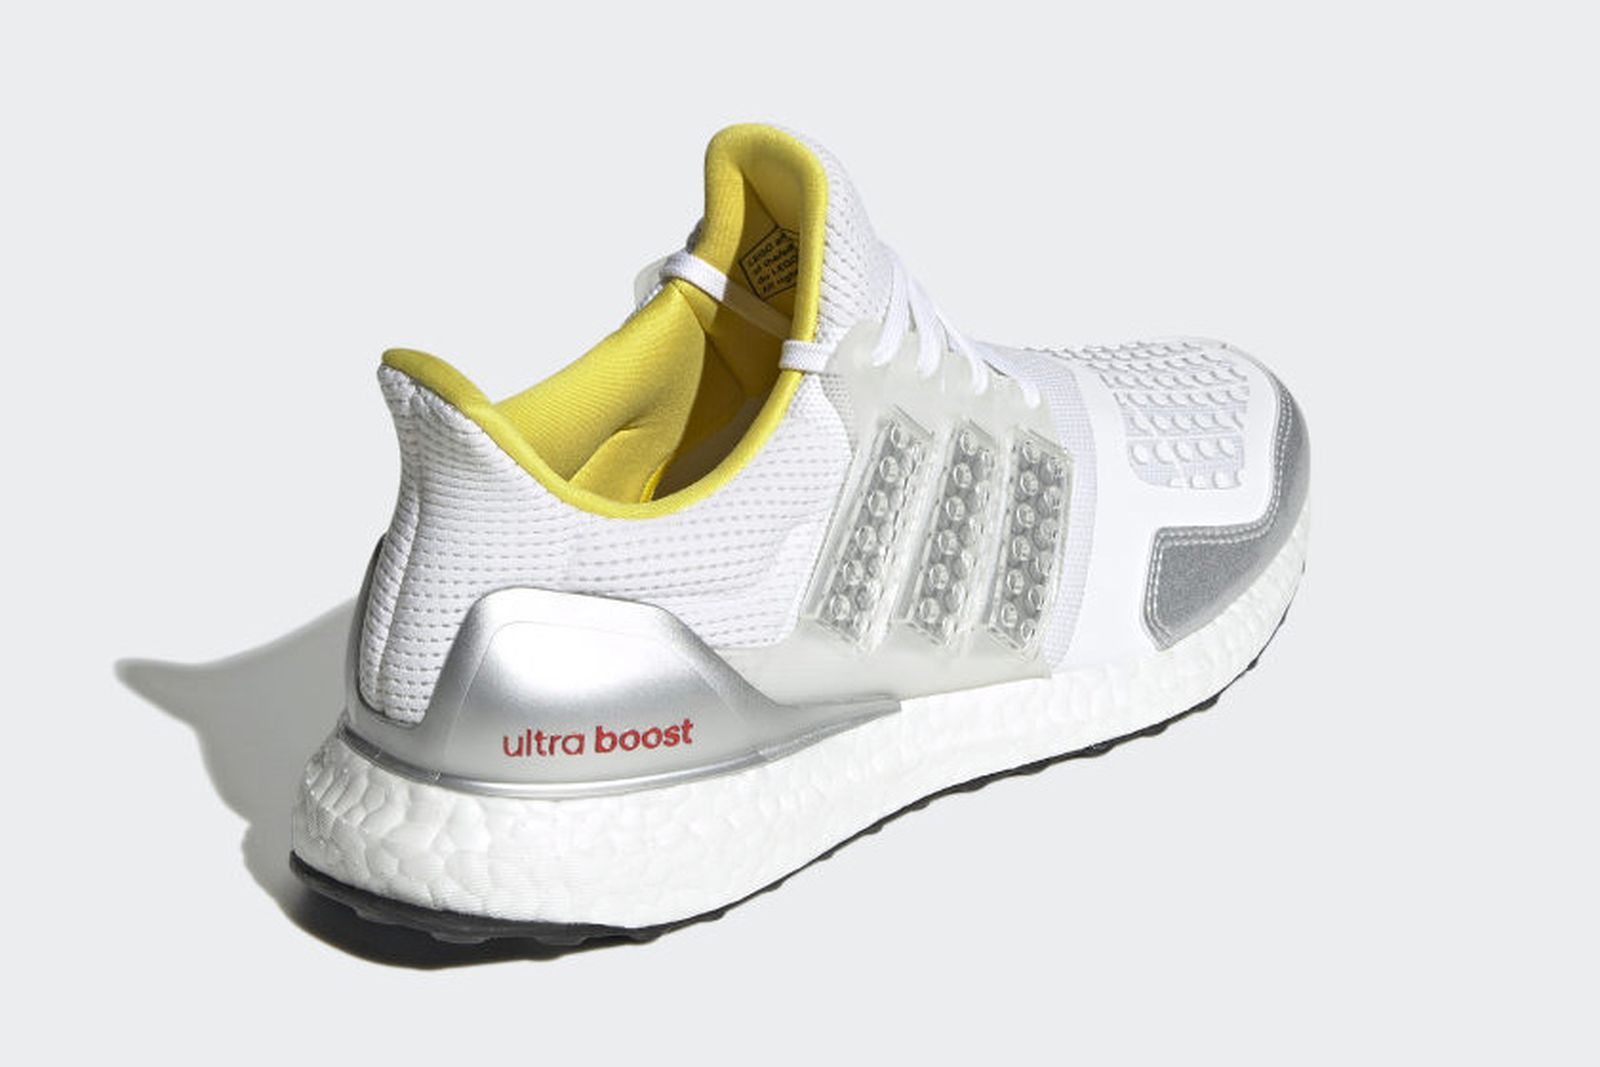 lego-adidas-ultraboost-dna-release-date-price-06